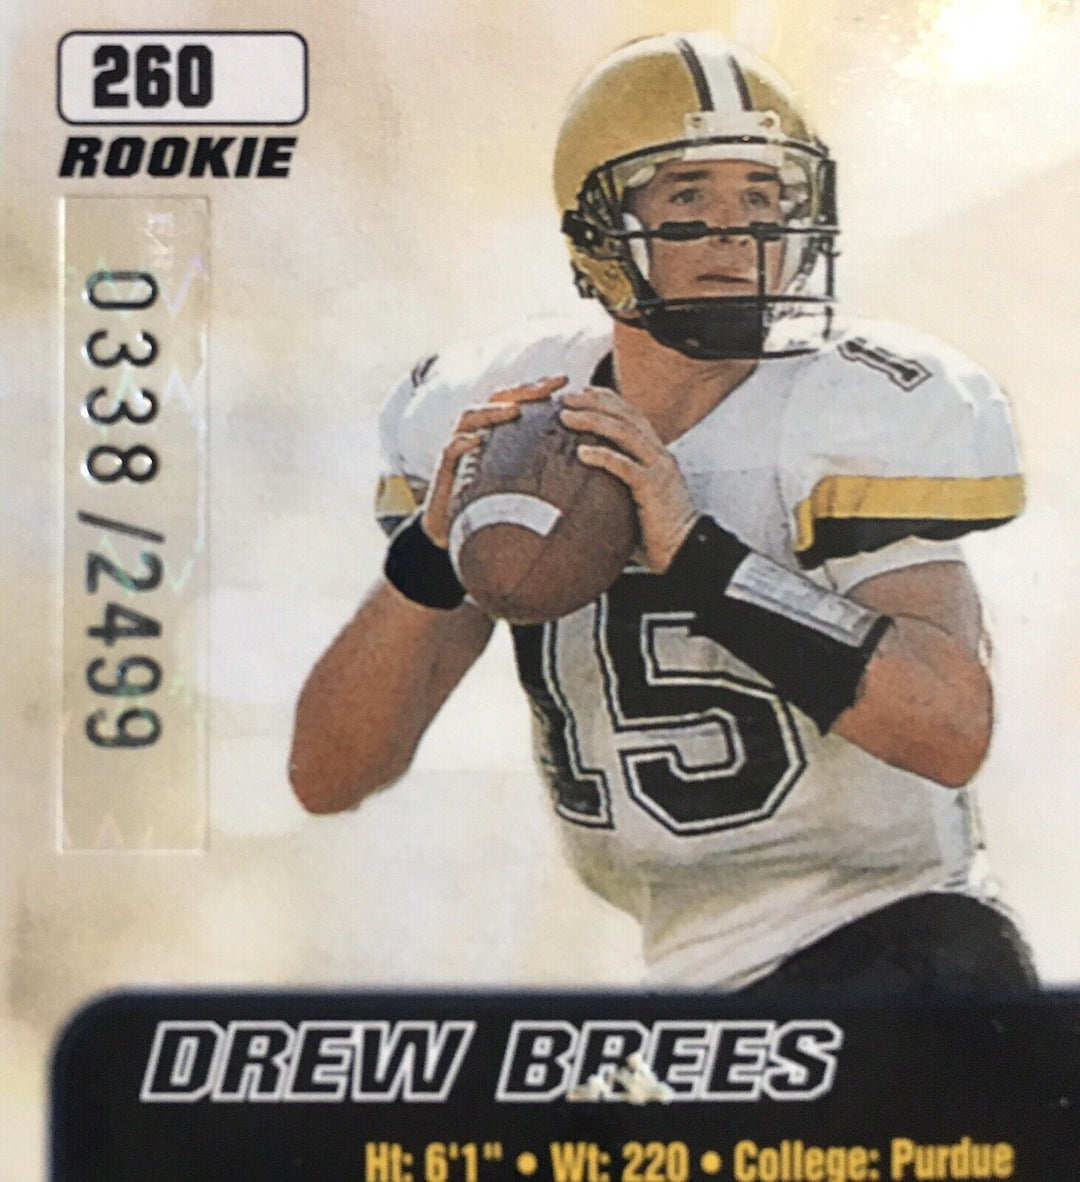 Drew Brees Fleer Ultra 2001 Rookie card # 260 Mint Le /2499 Great Card Image 3